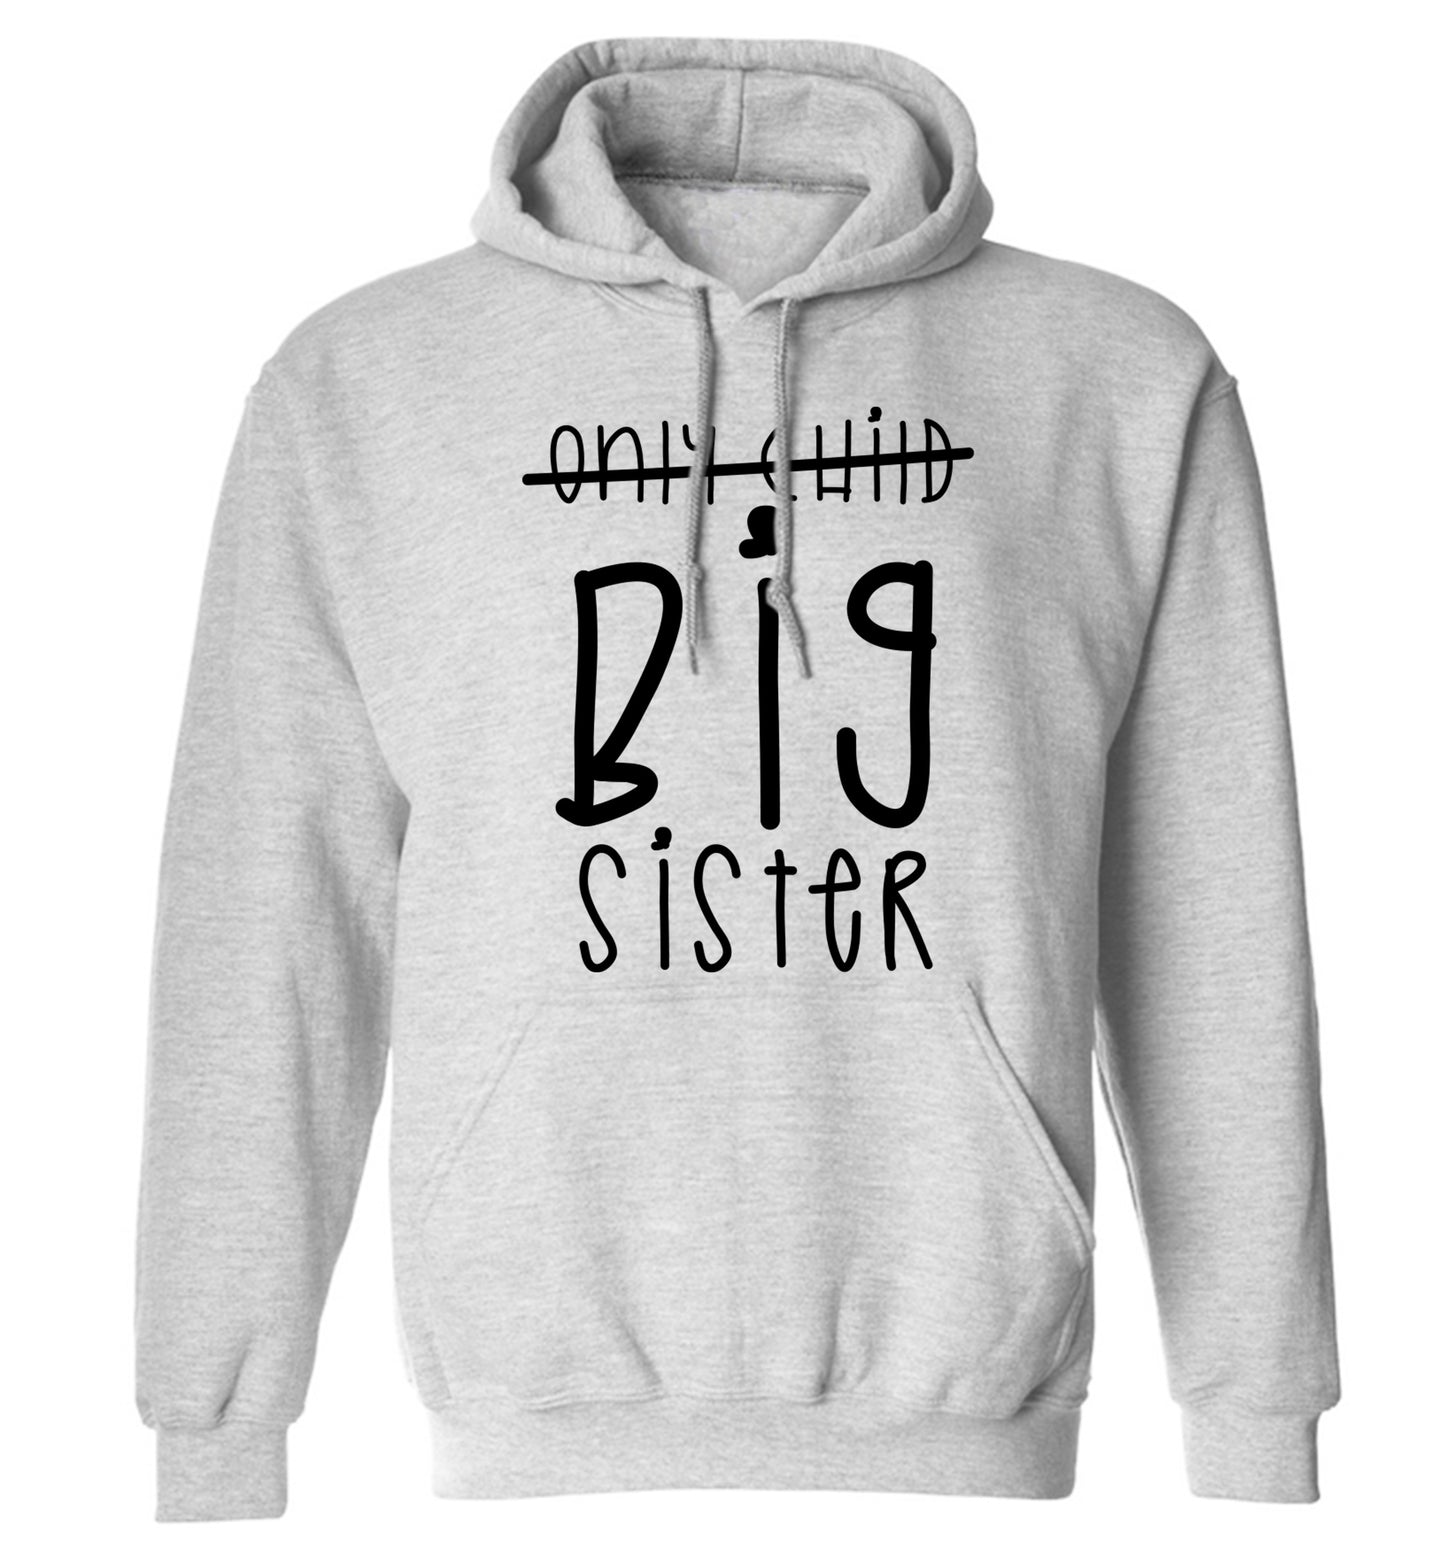 Only child big sister adults unisex grey hoodie 2XL